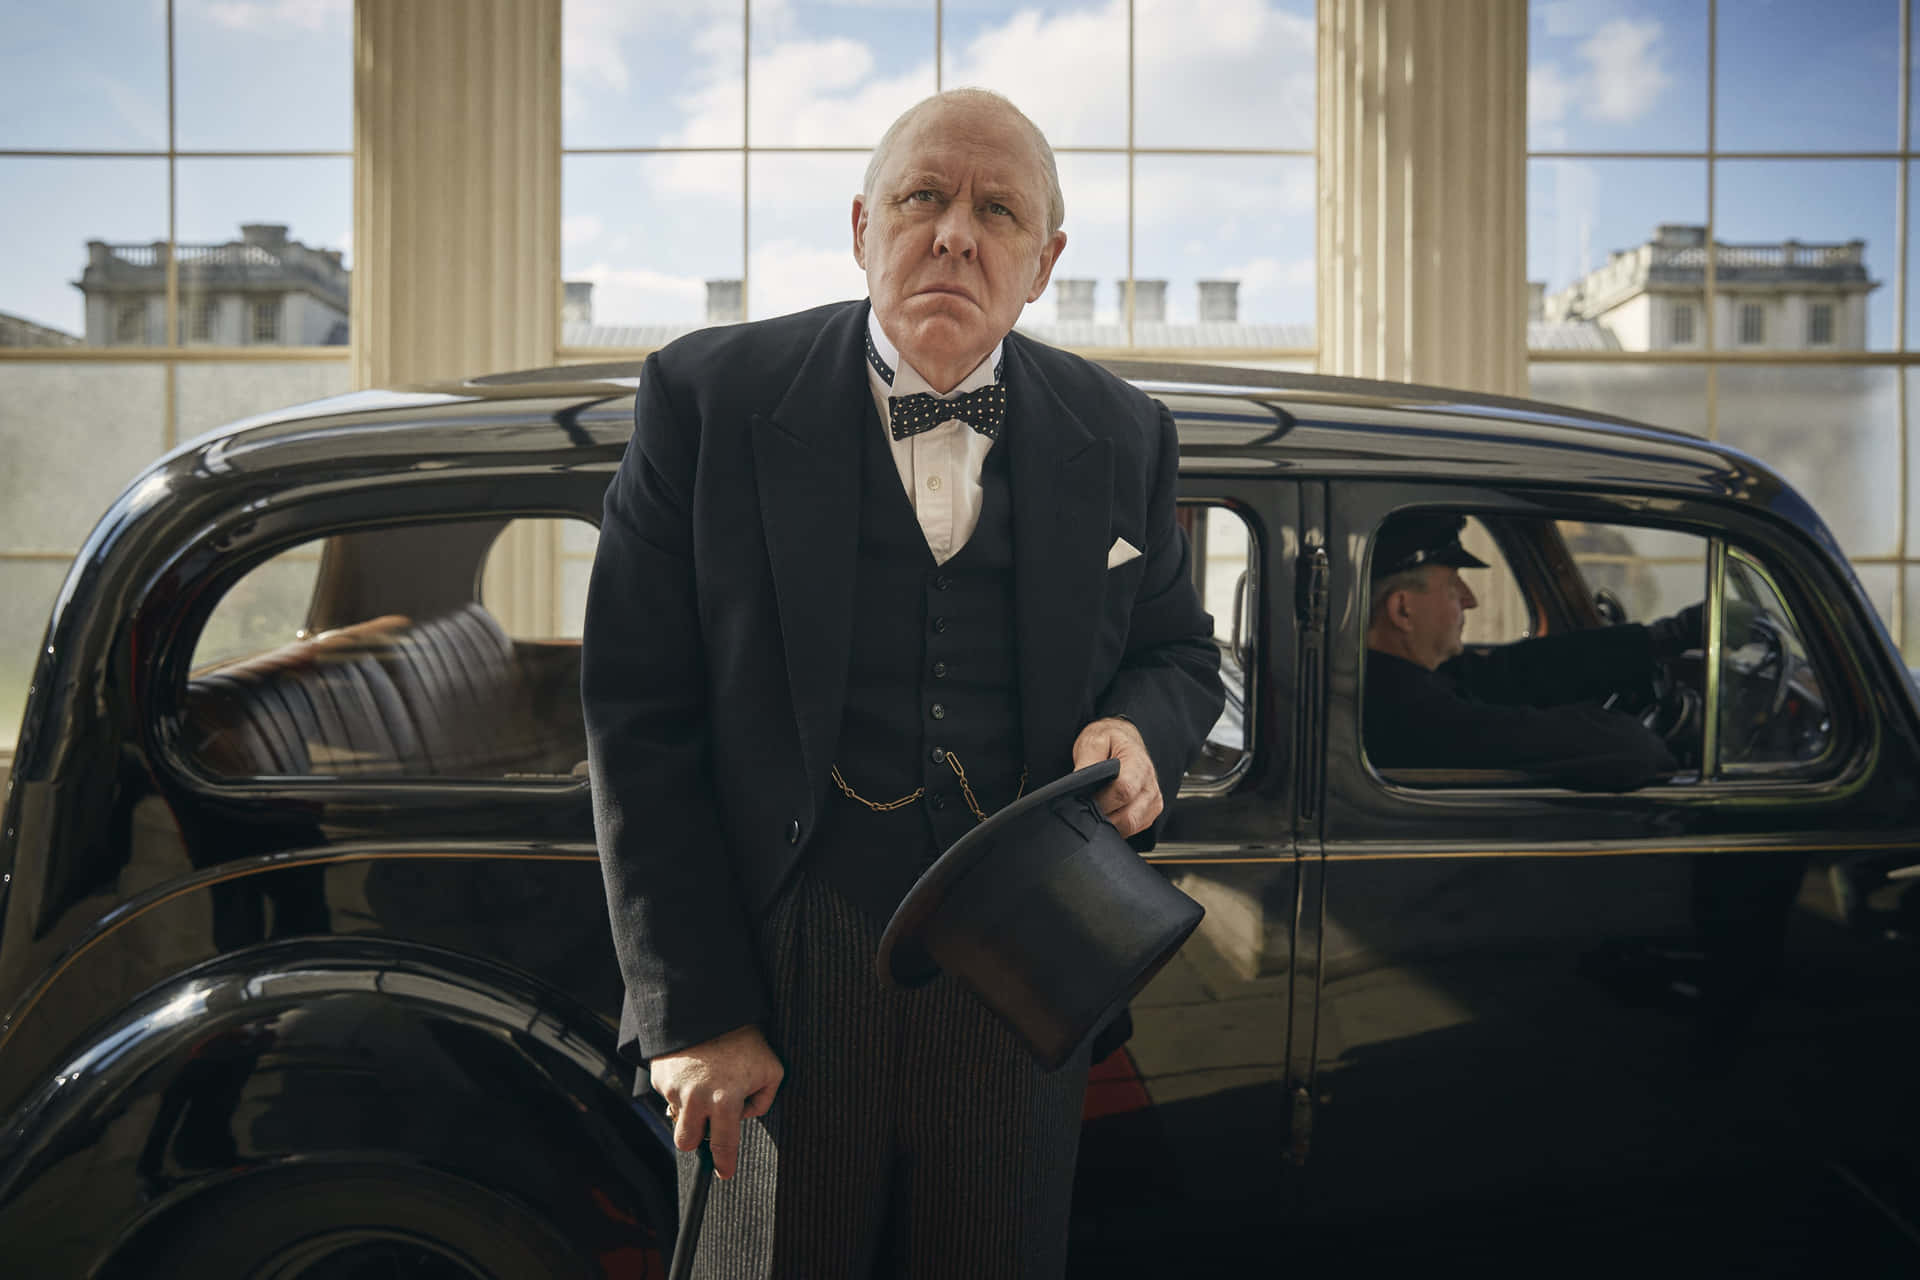 A Man In A Tuxedo Standing Next To A Car